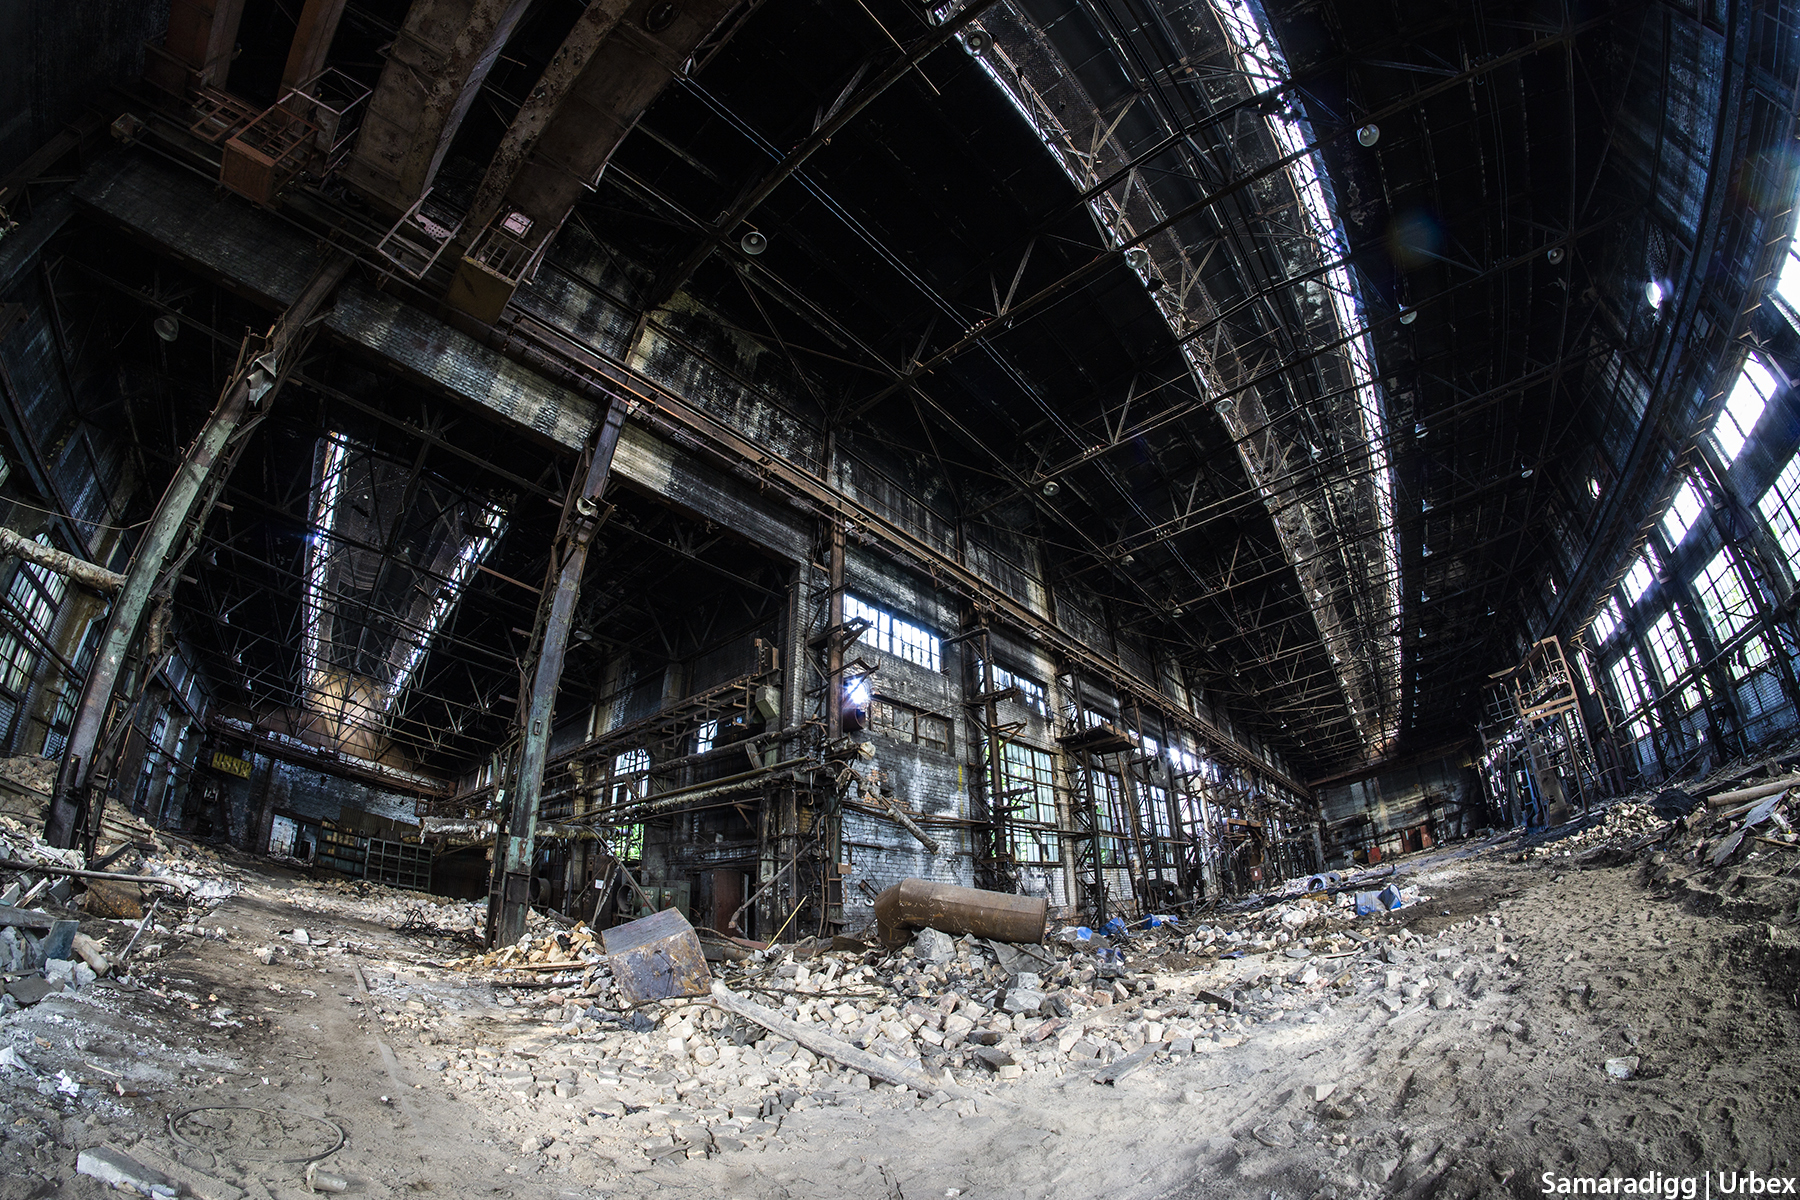 Ruinization of the USSR. - My, Urbanphoto, Urbanfact, Abandoned, Russia, Abandoned factory, Library, Factory, Forgotten, , Back to USSR, Soviet, Story, Art, the USSR, Samara Region, All ashes, Collapse of the USSR, Travels, Cast, Longpost